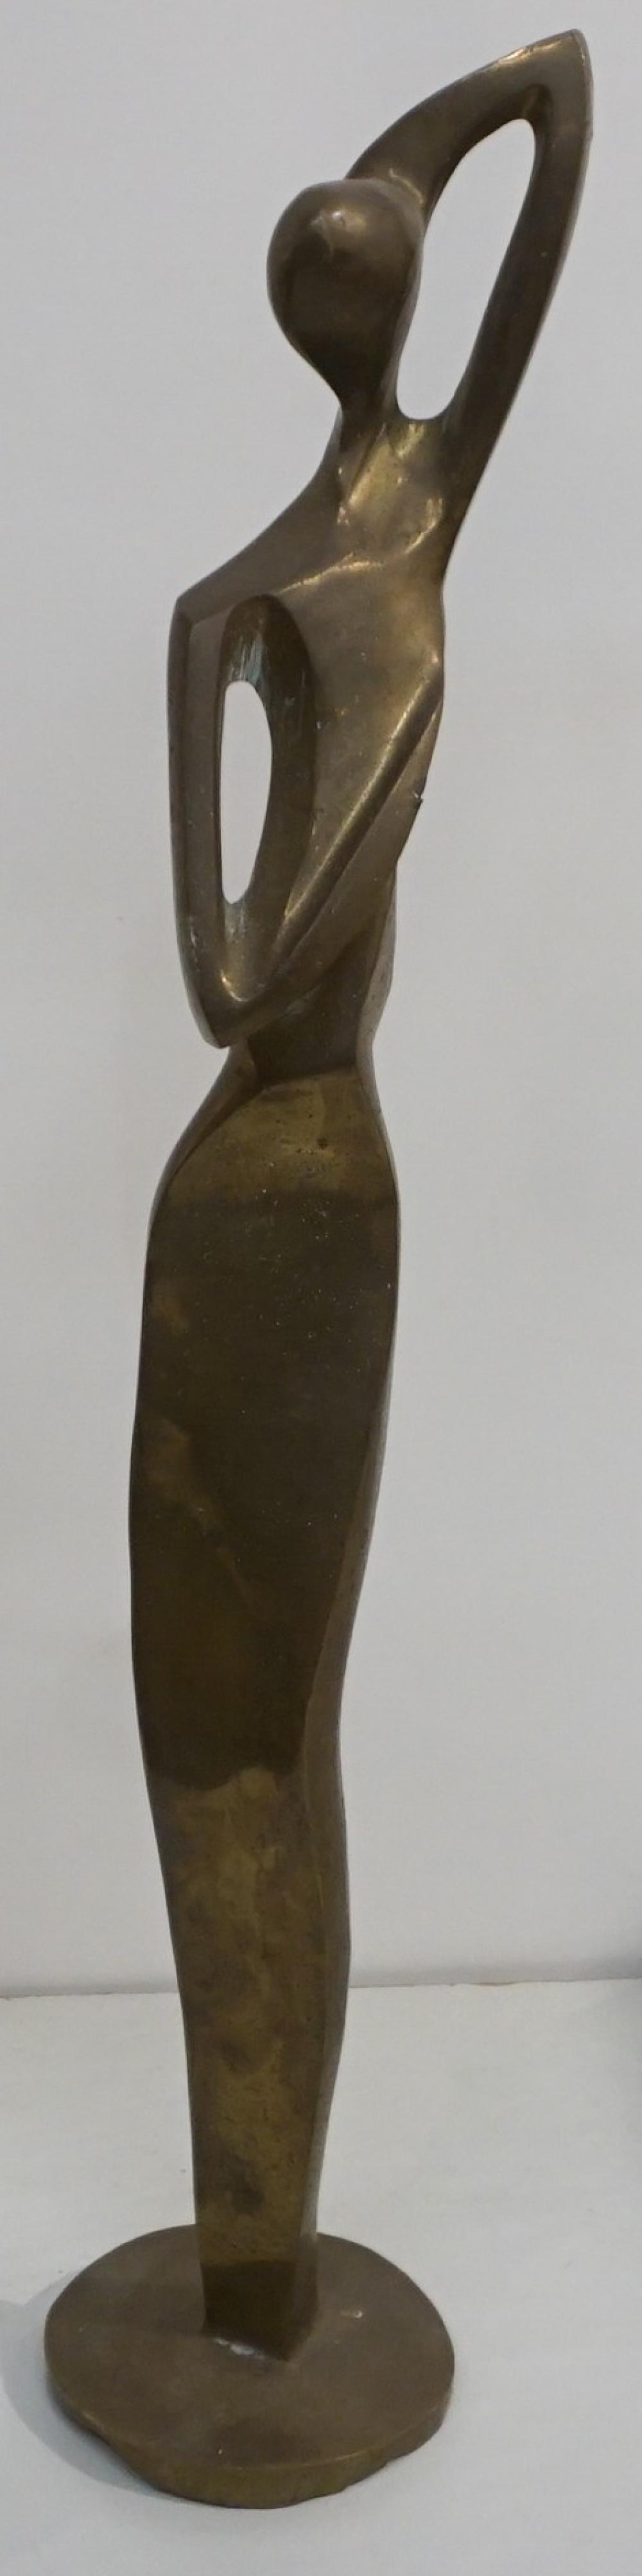 CONTEMPORARY BRASS ABSTRACT FIGURE 331376